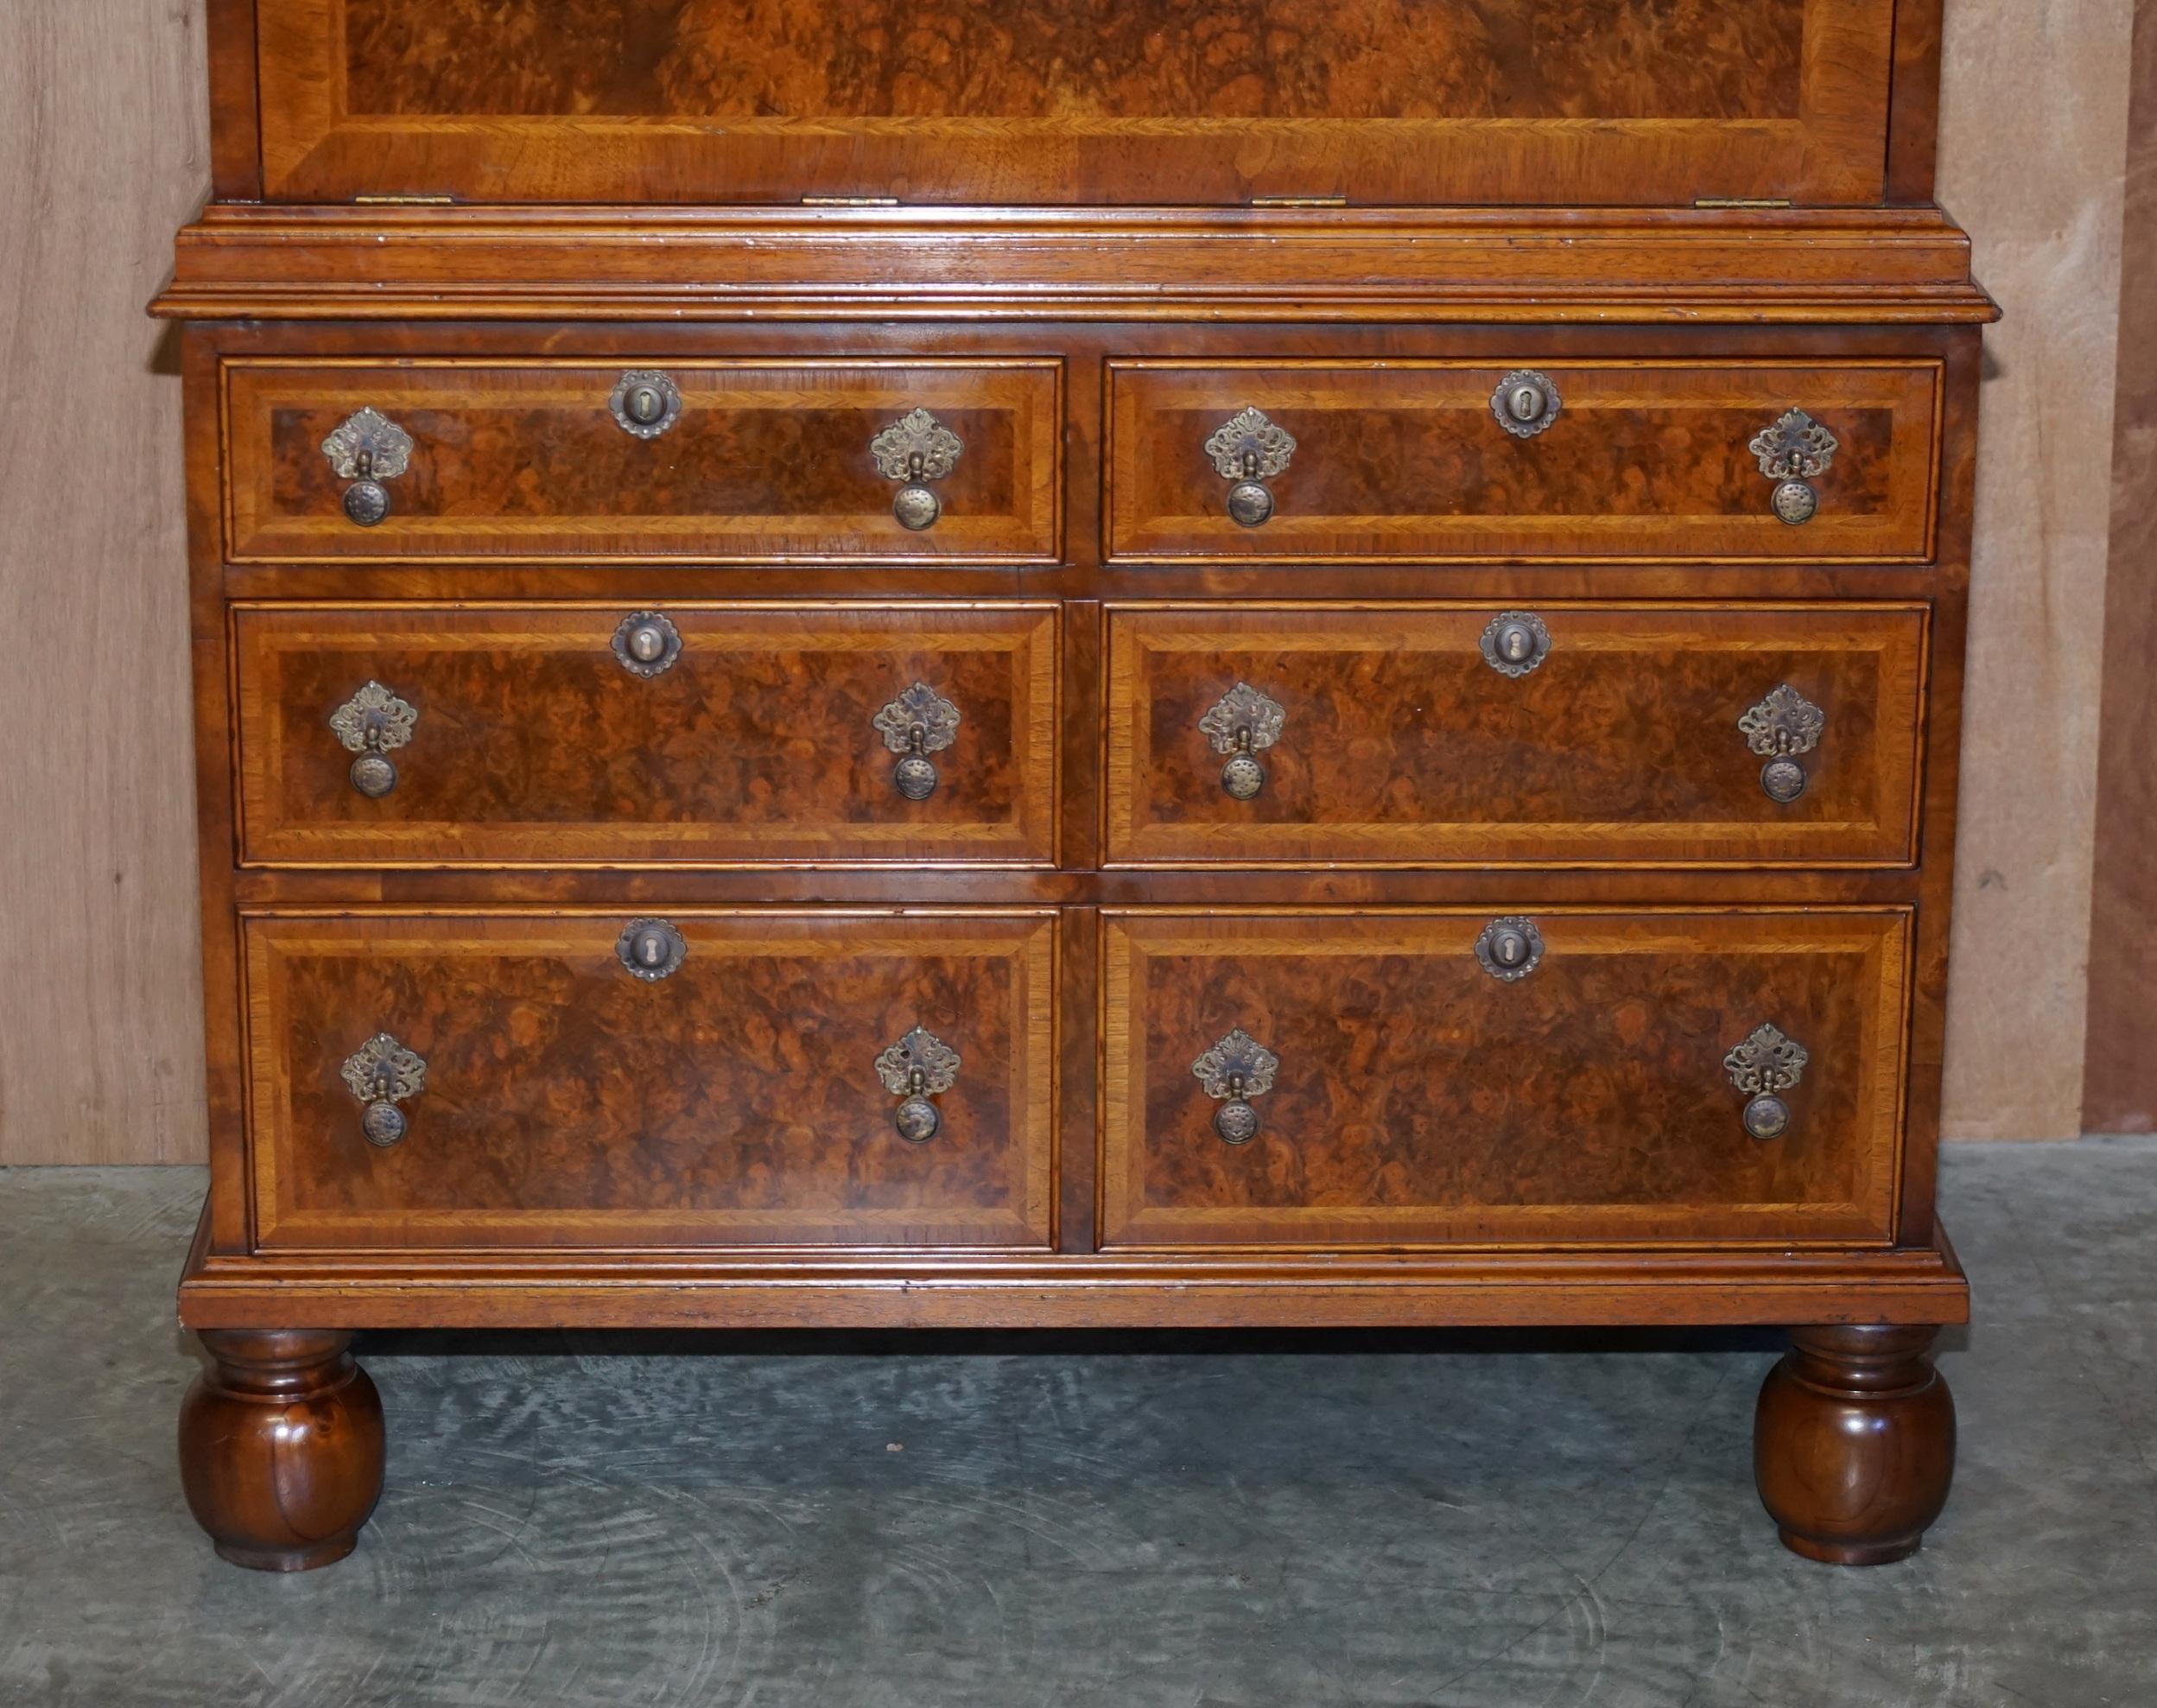 Hand-Crafted Brights of Nettlebed Burr Walnut Bureau with Drop Front Desk & Chest of Drawers